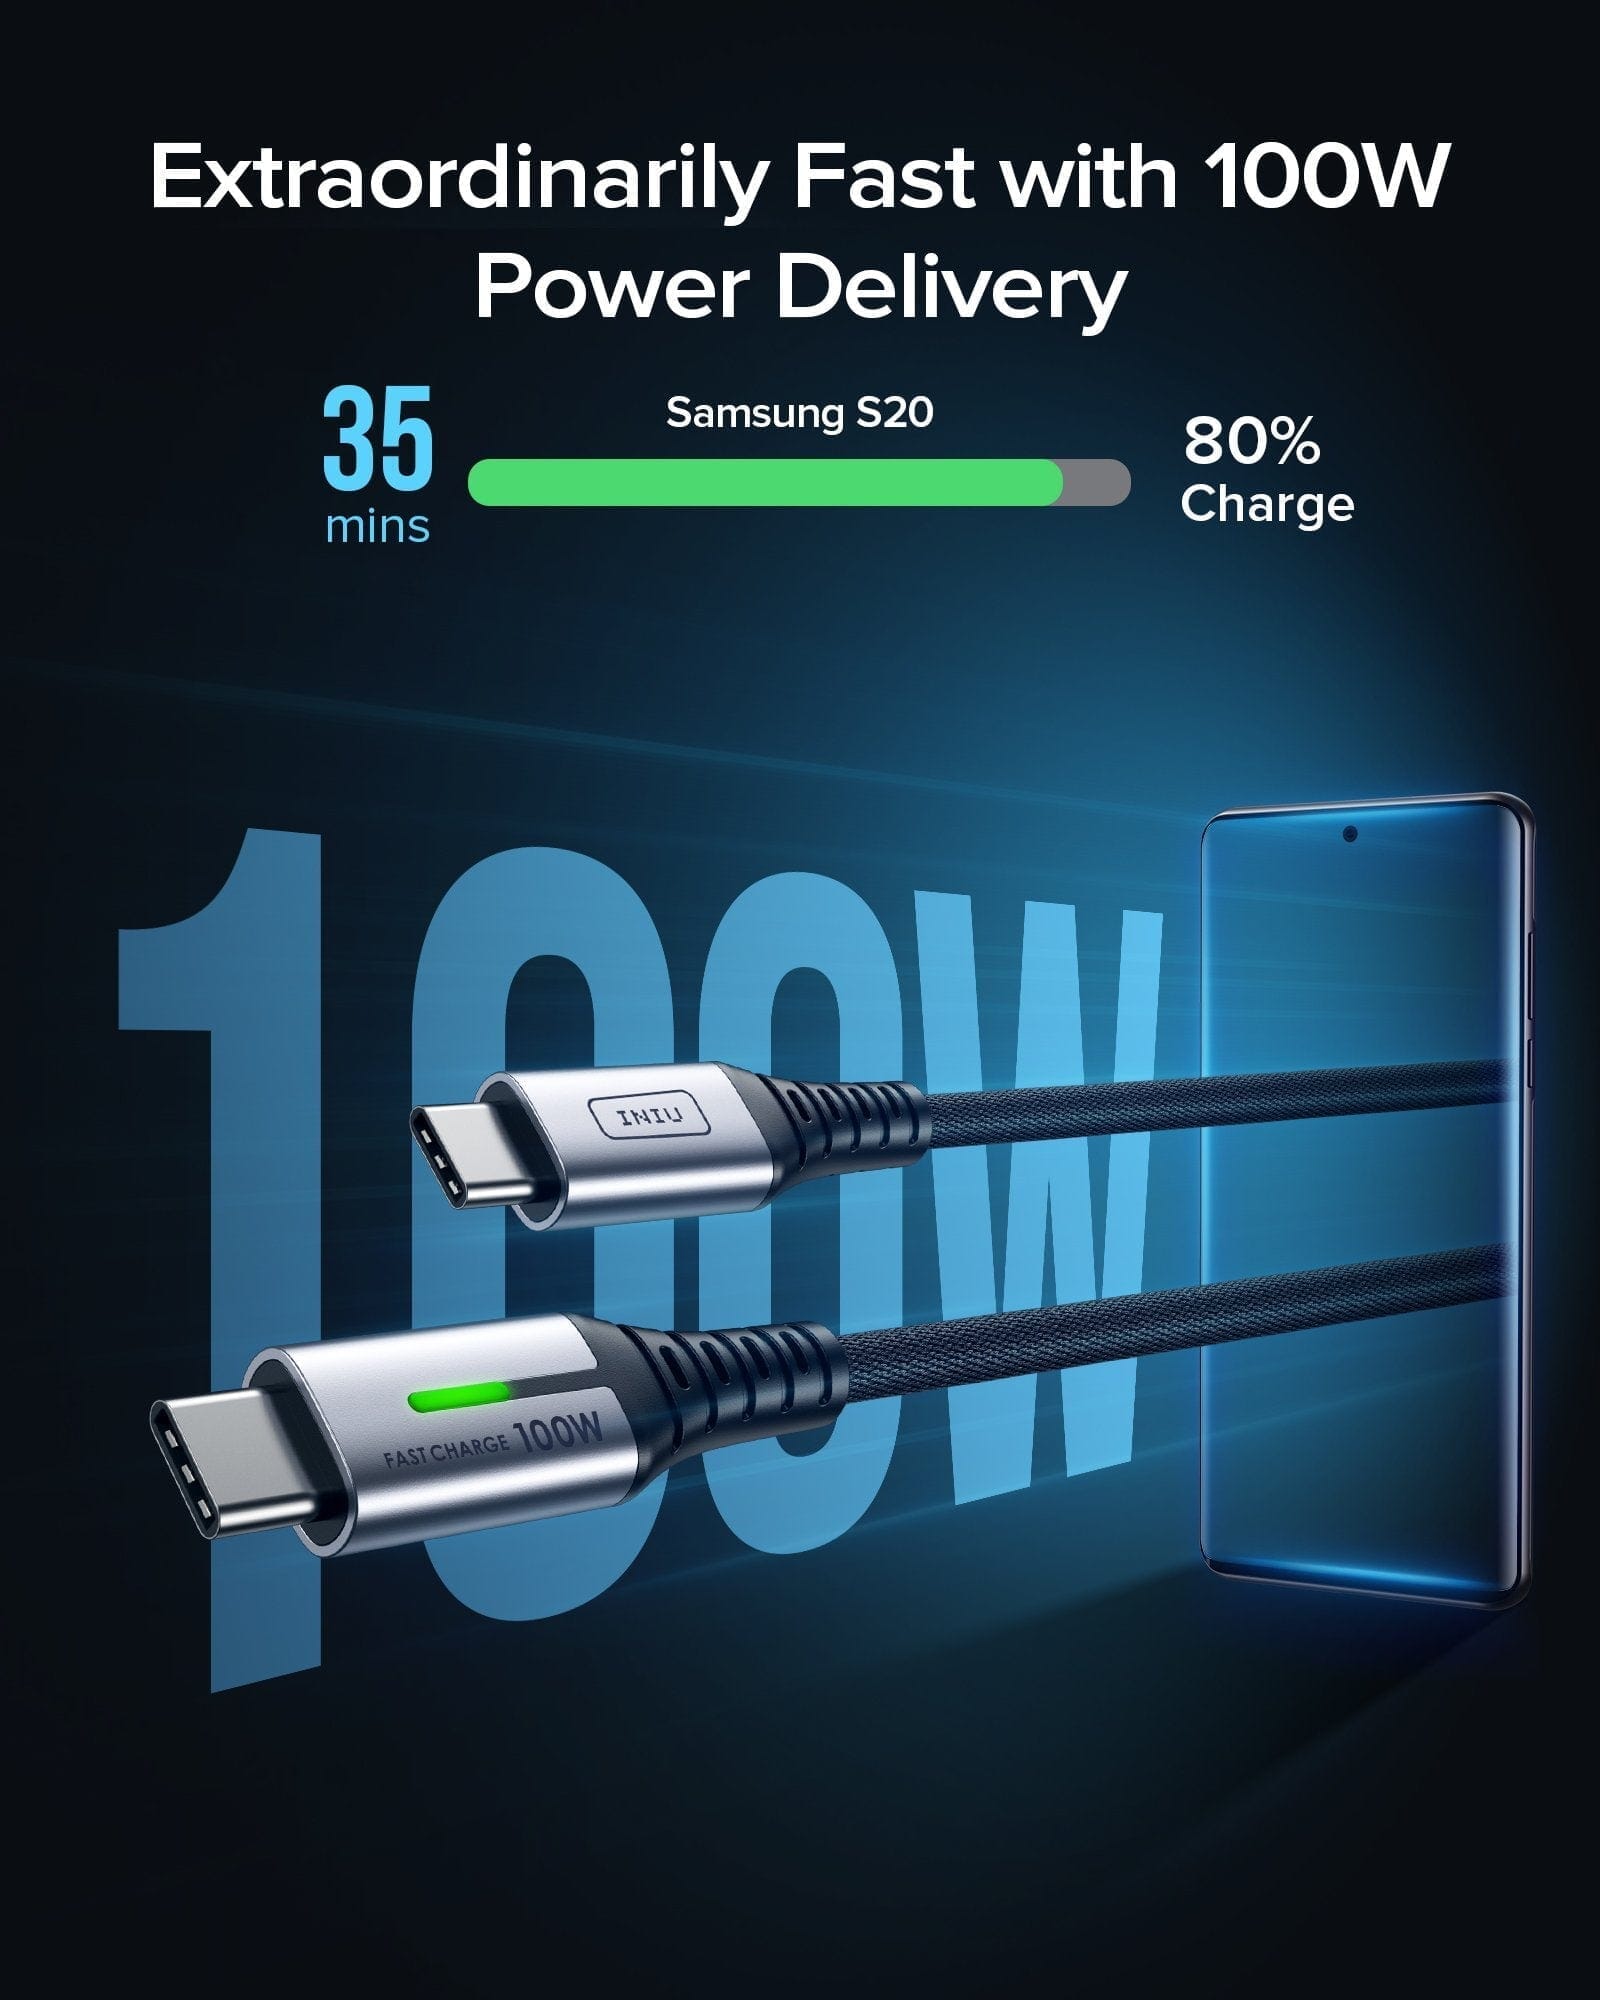 Extraordinarily Fast with 100W Power Delivery